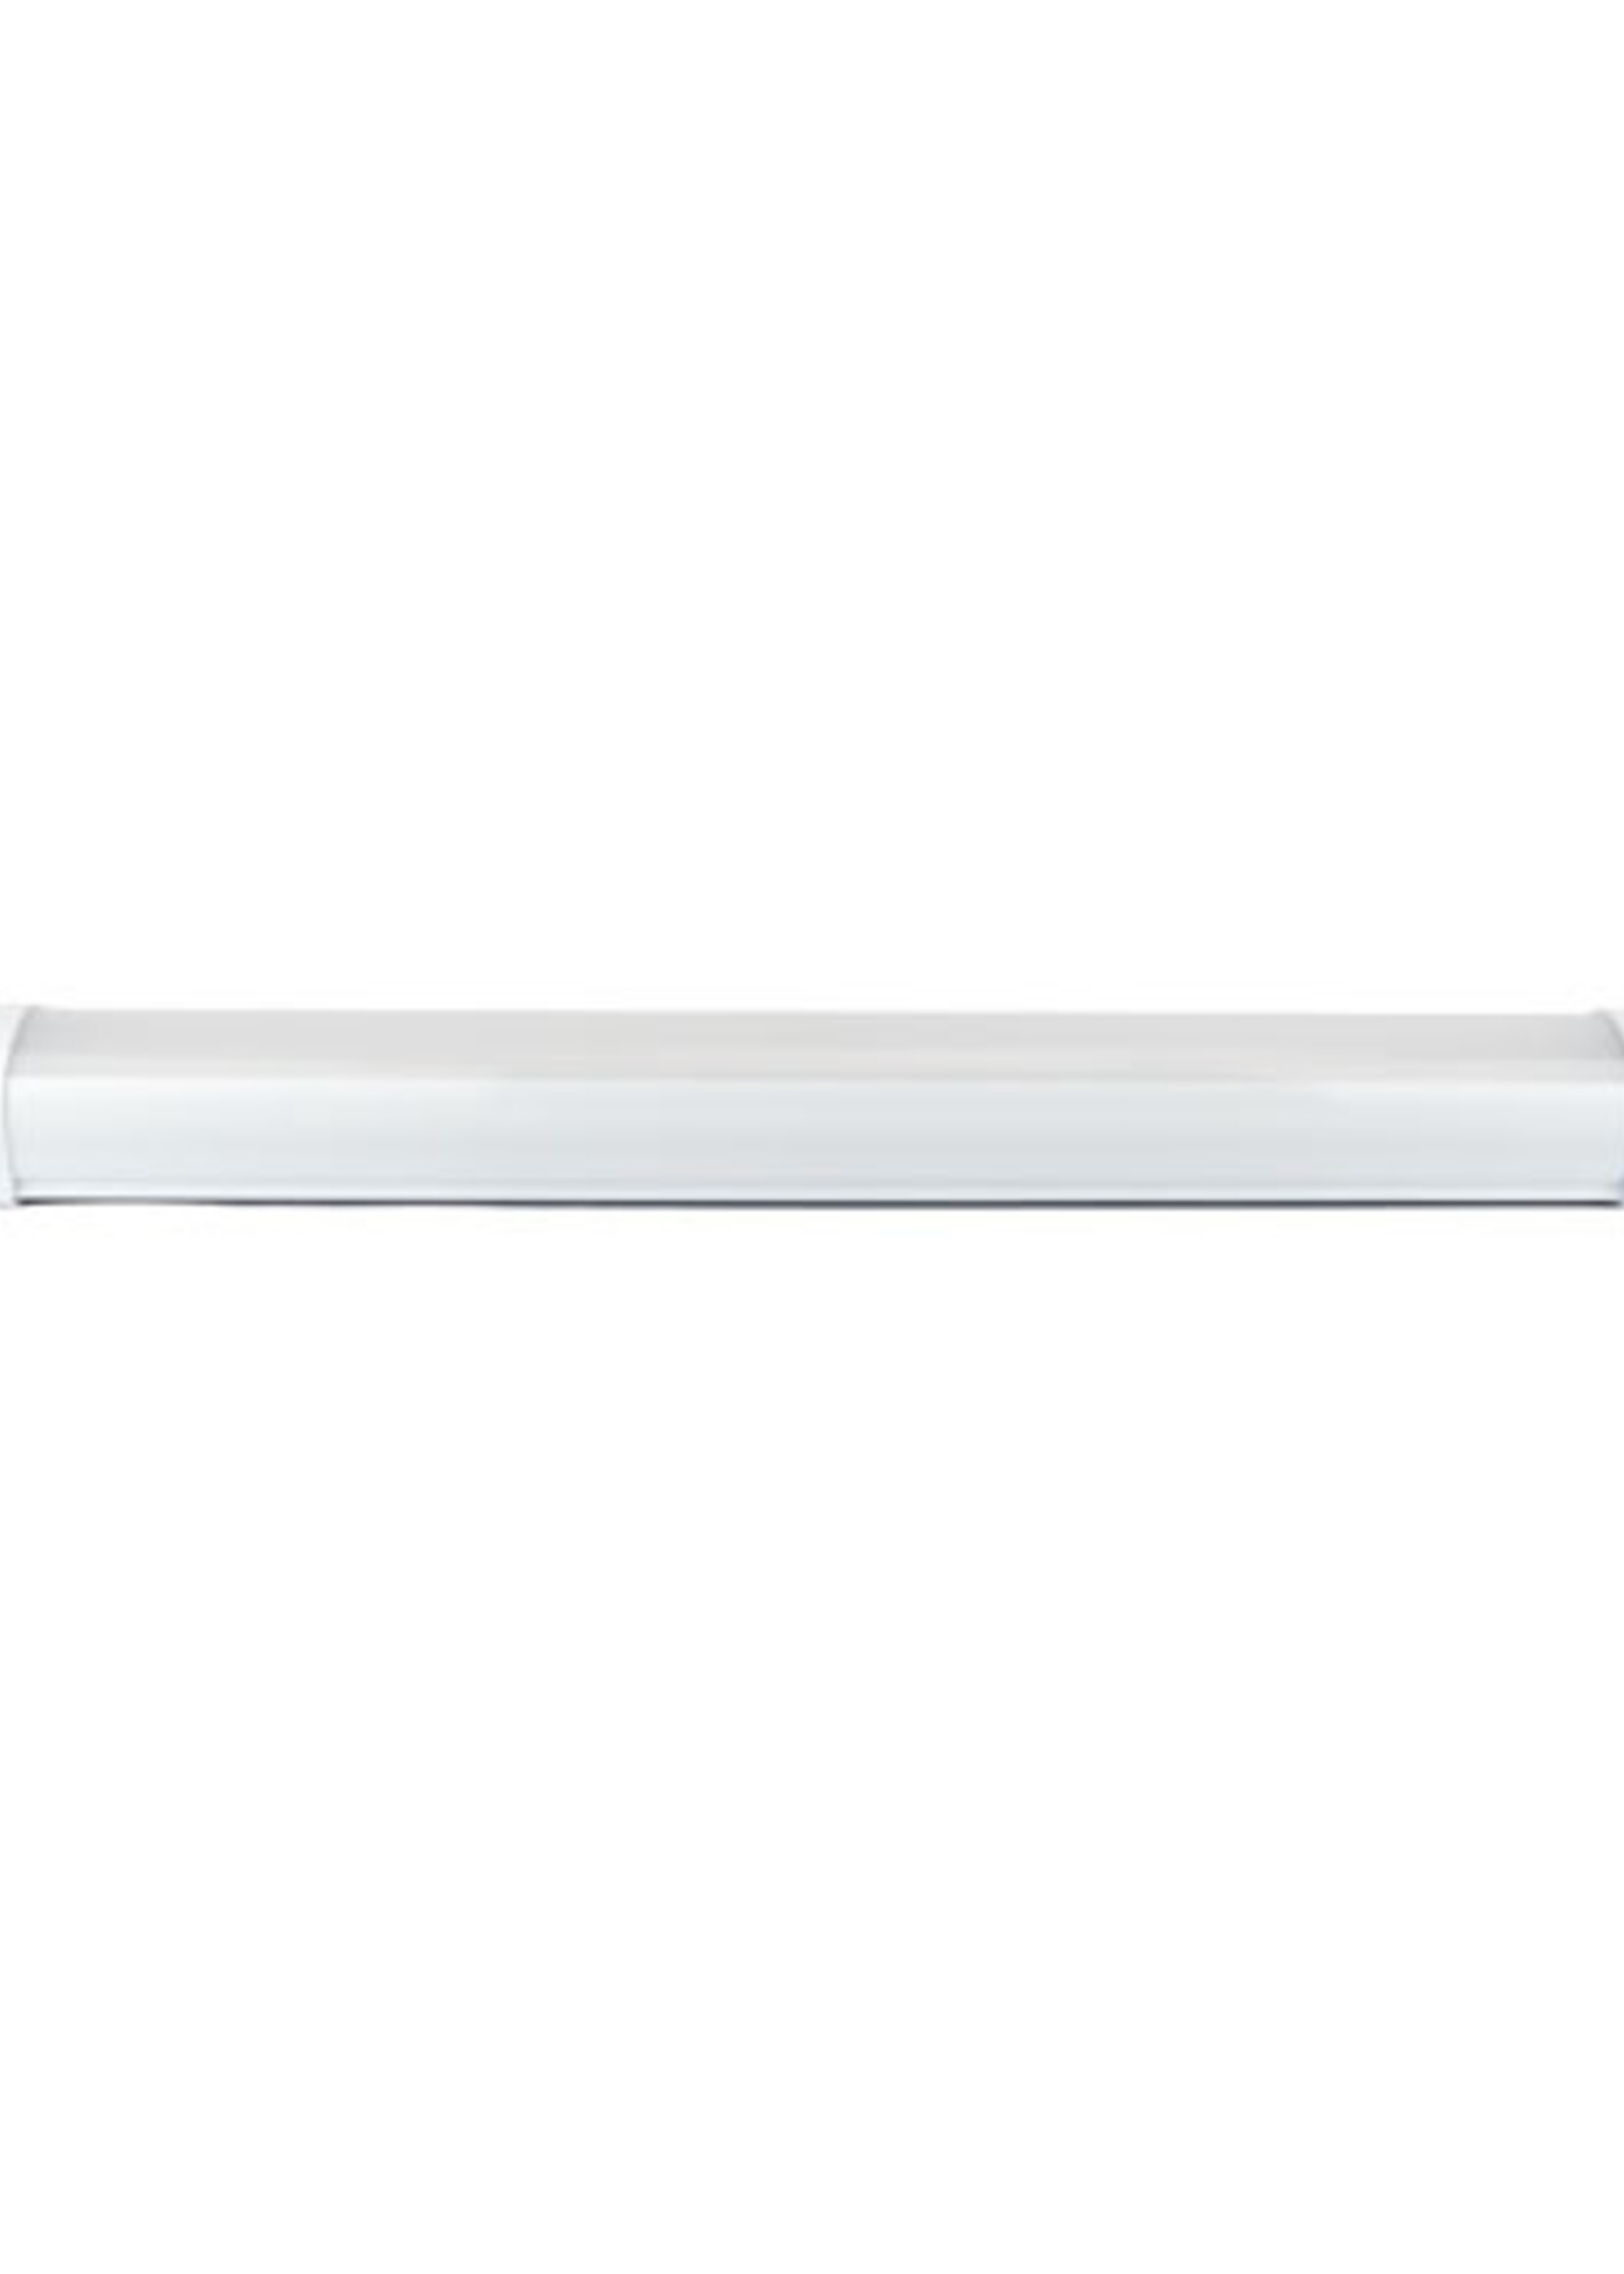 Philips CertaDrive LED Tri-proof IP65 water resistant 65cm 18W Philips driver